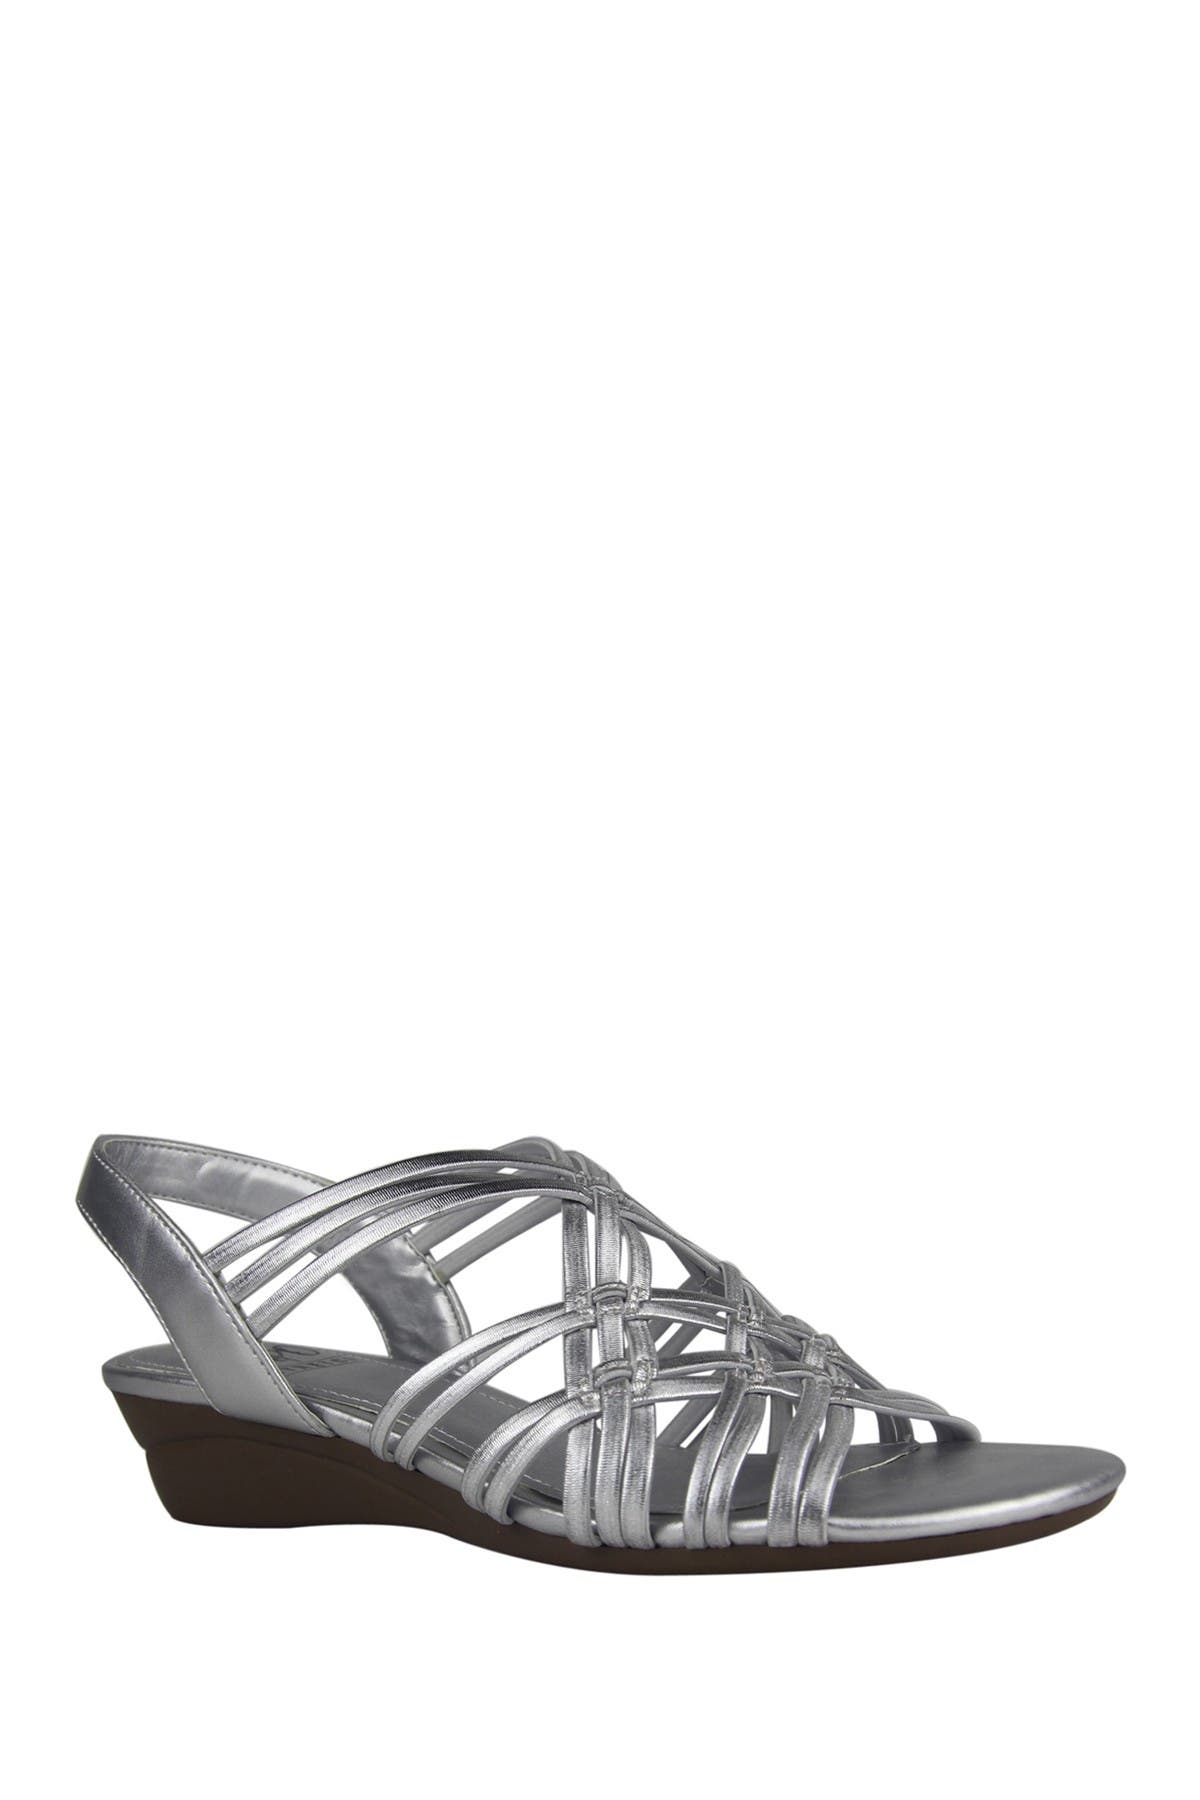 Impo Rainelle Stretch Wedge Sandal In Silver